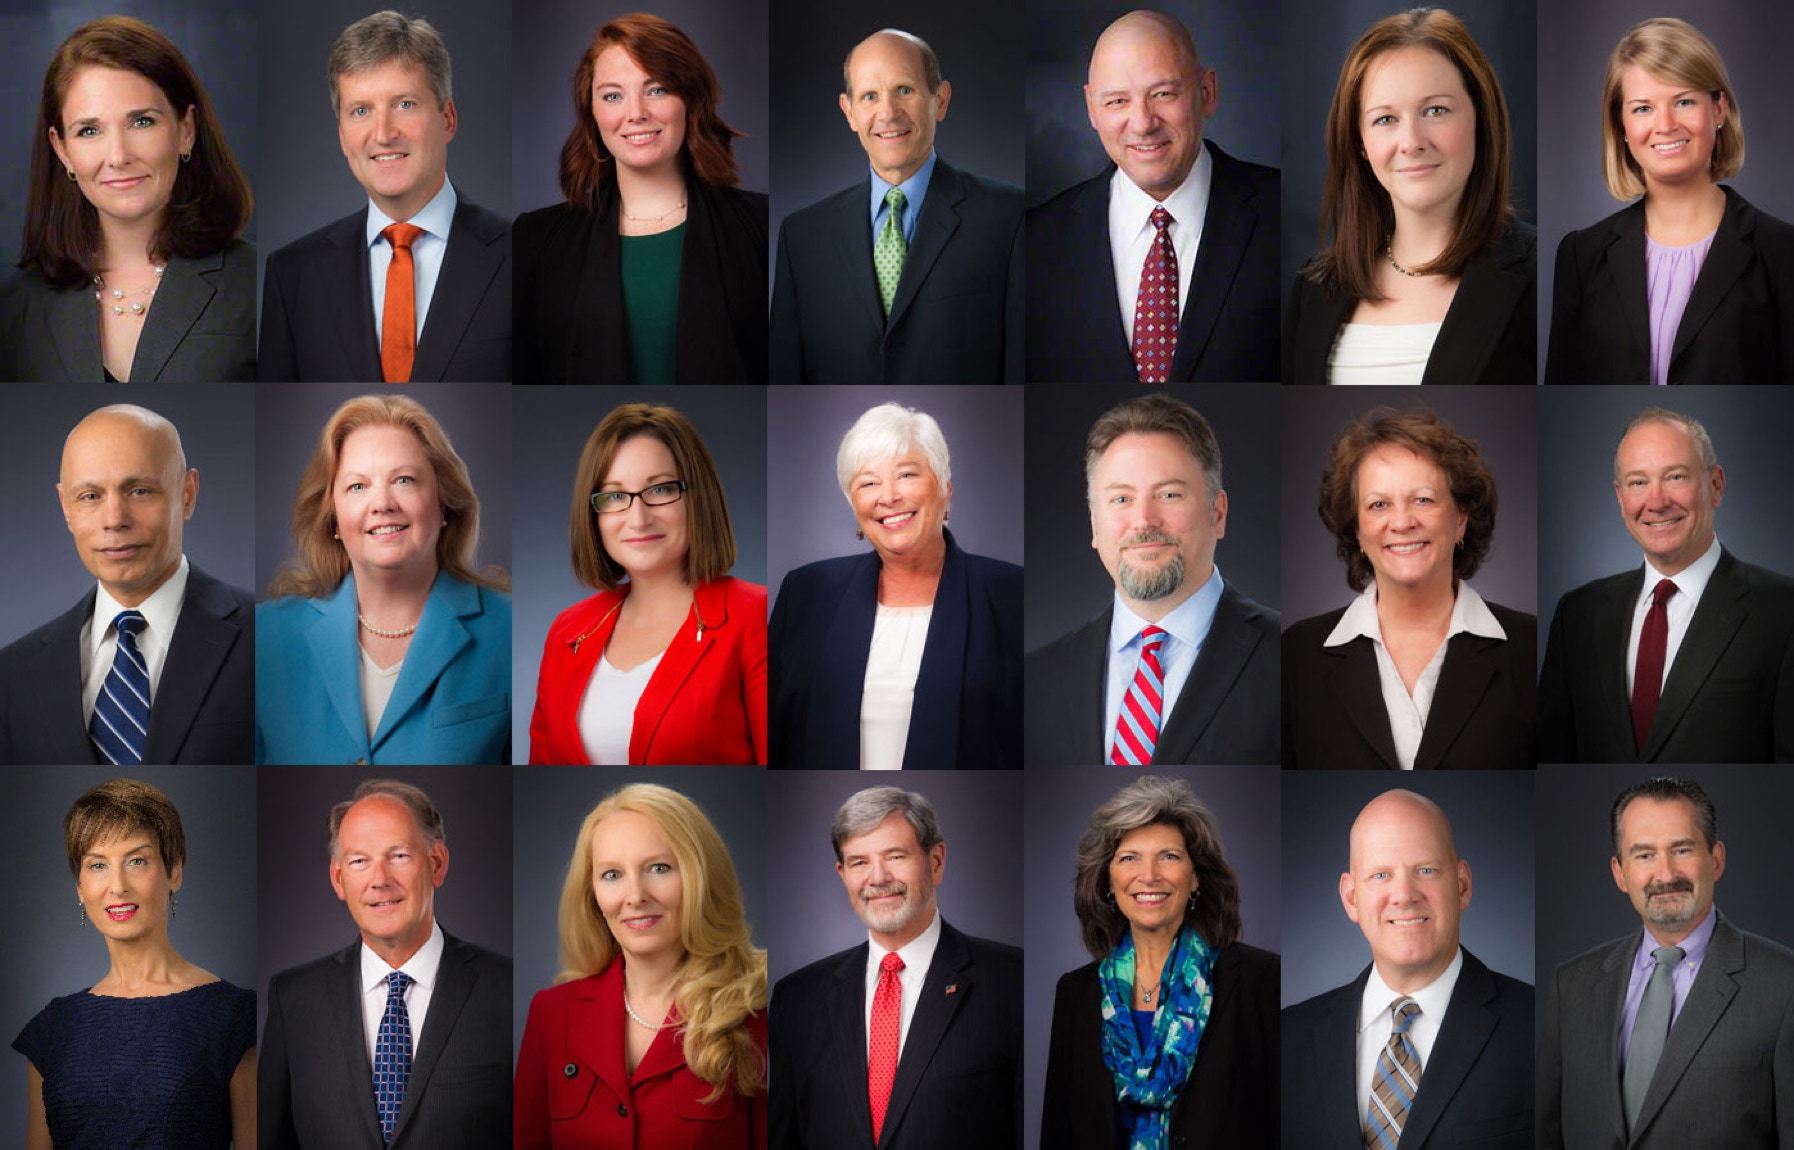 Business class headshots of ten different people